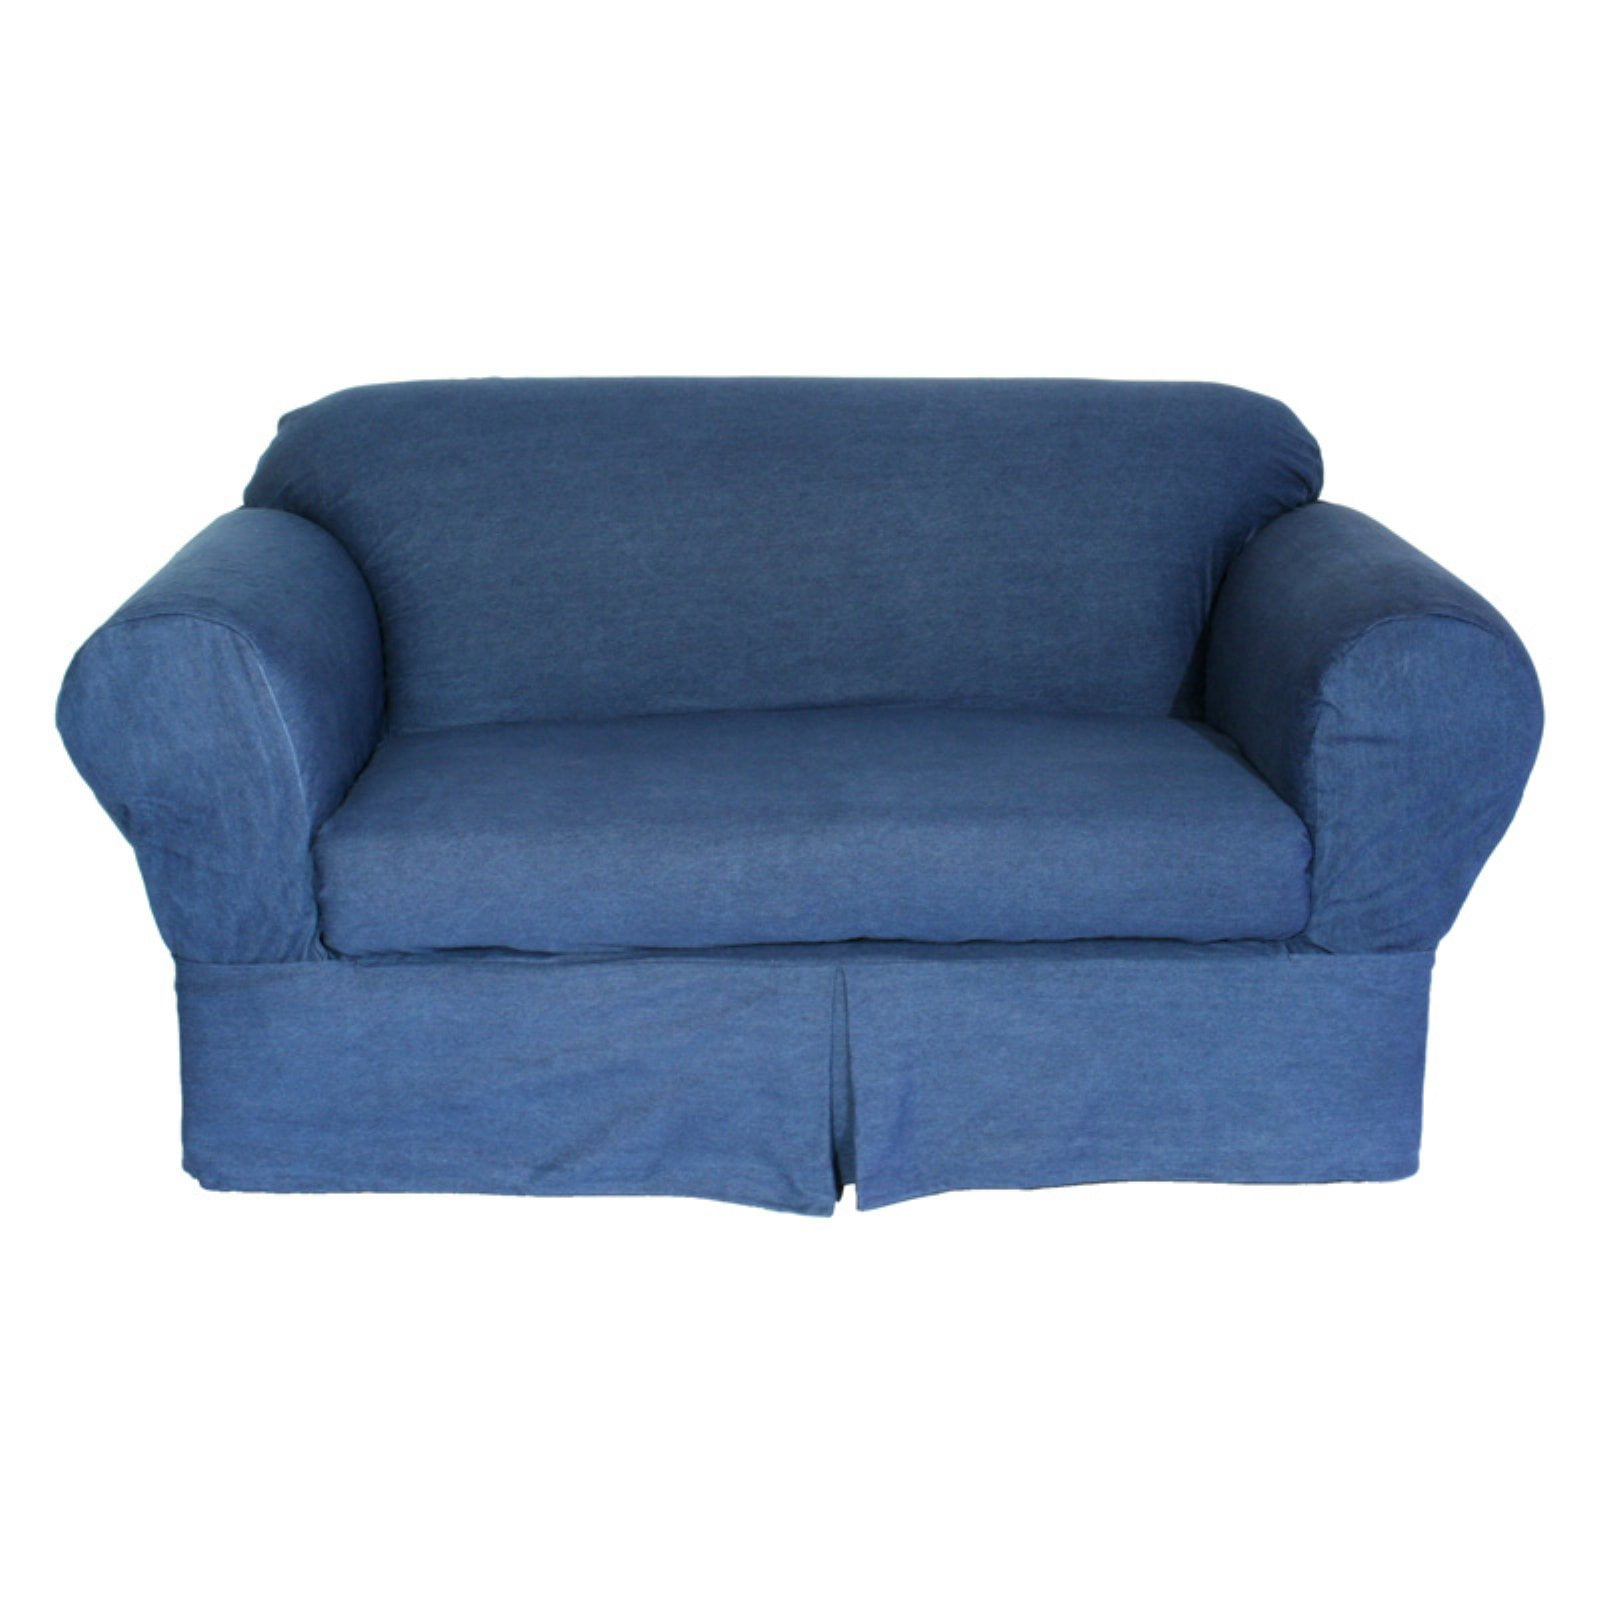 Washed Heavy Blue Denim 2 pc Sofa Slip Cover Cotton Couch  Loveseat Arm Chair 